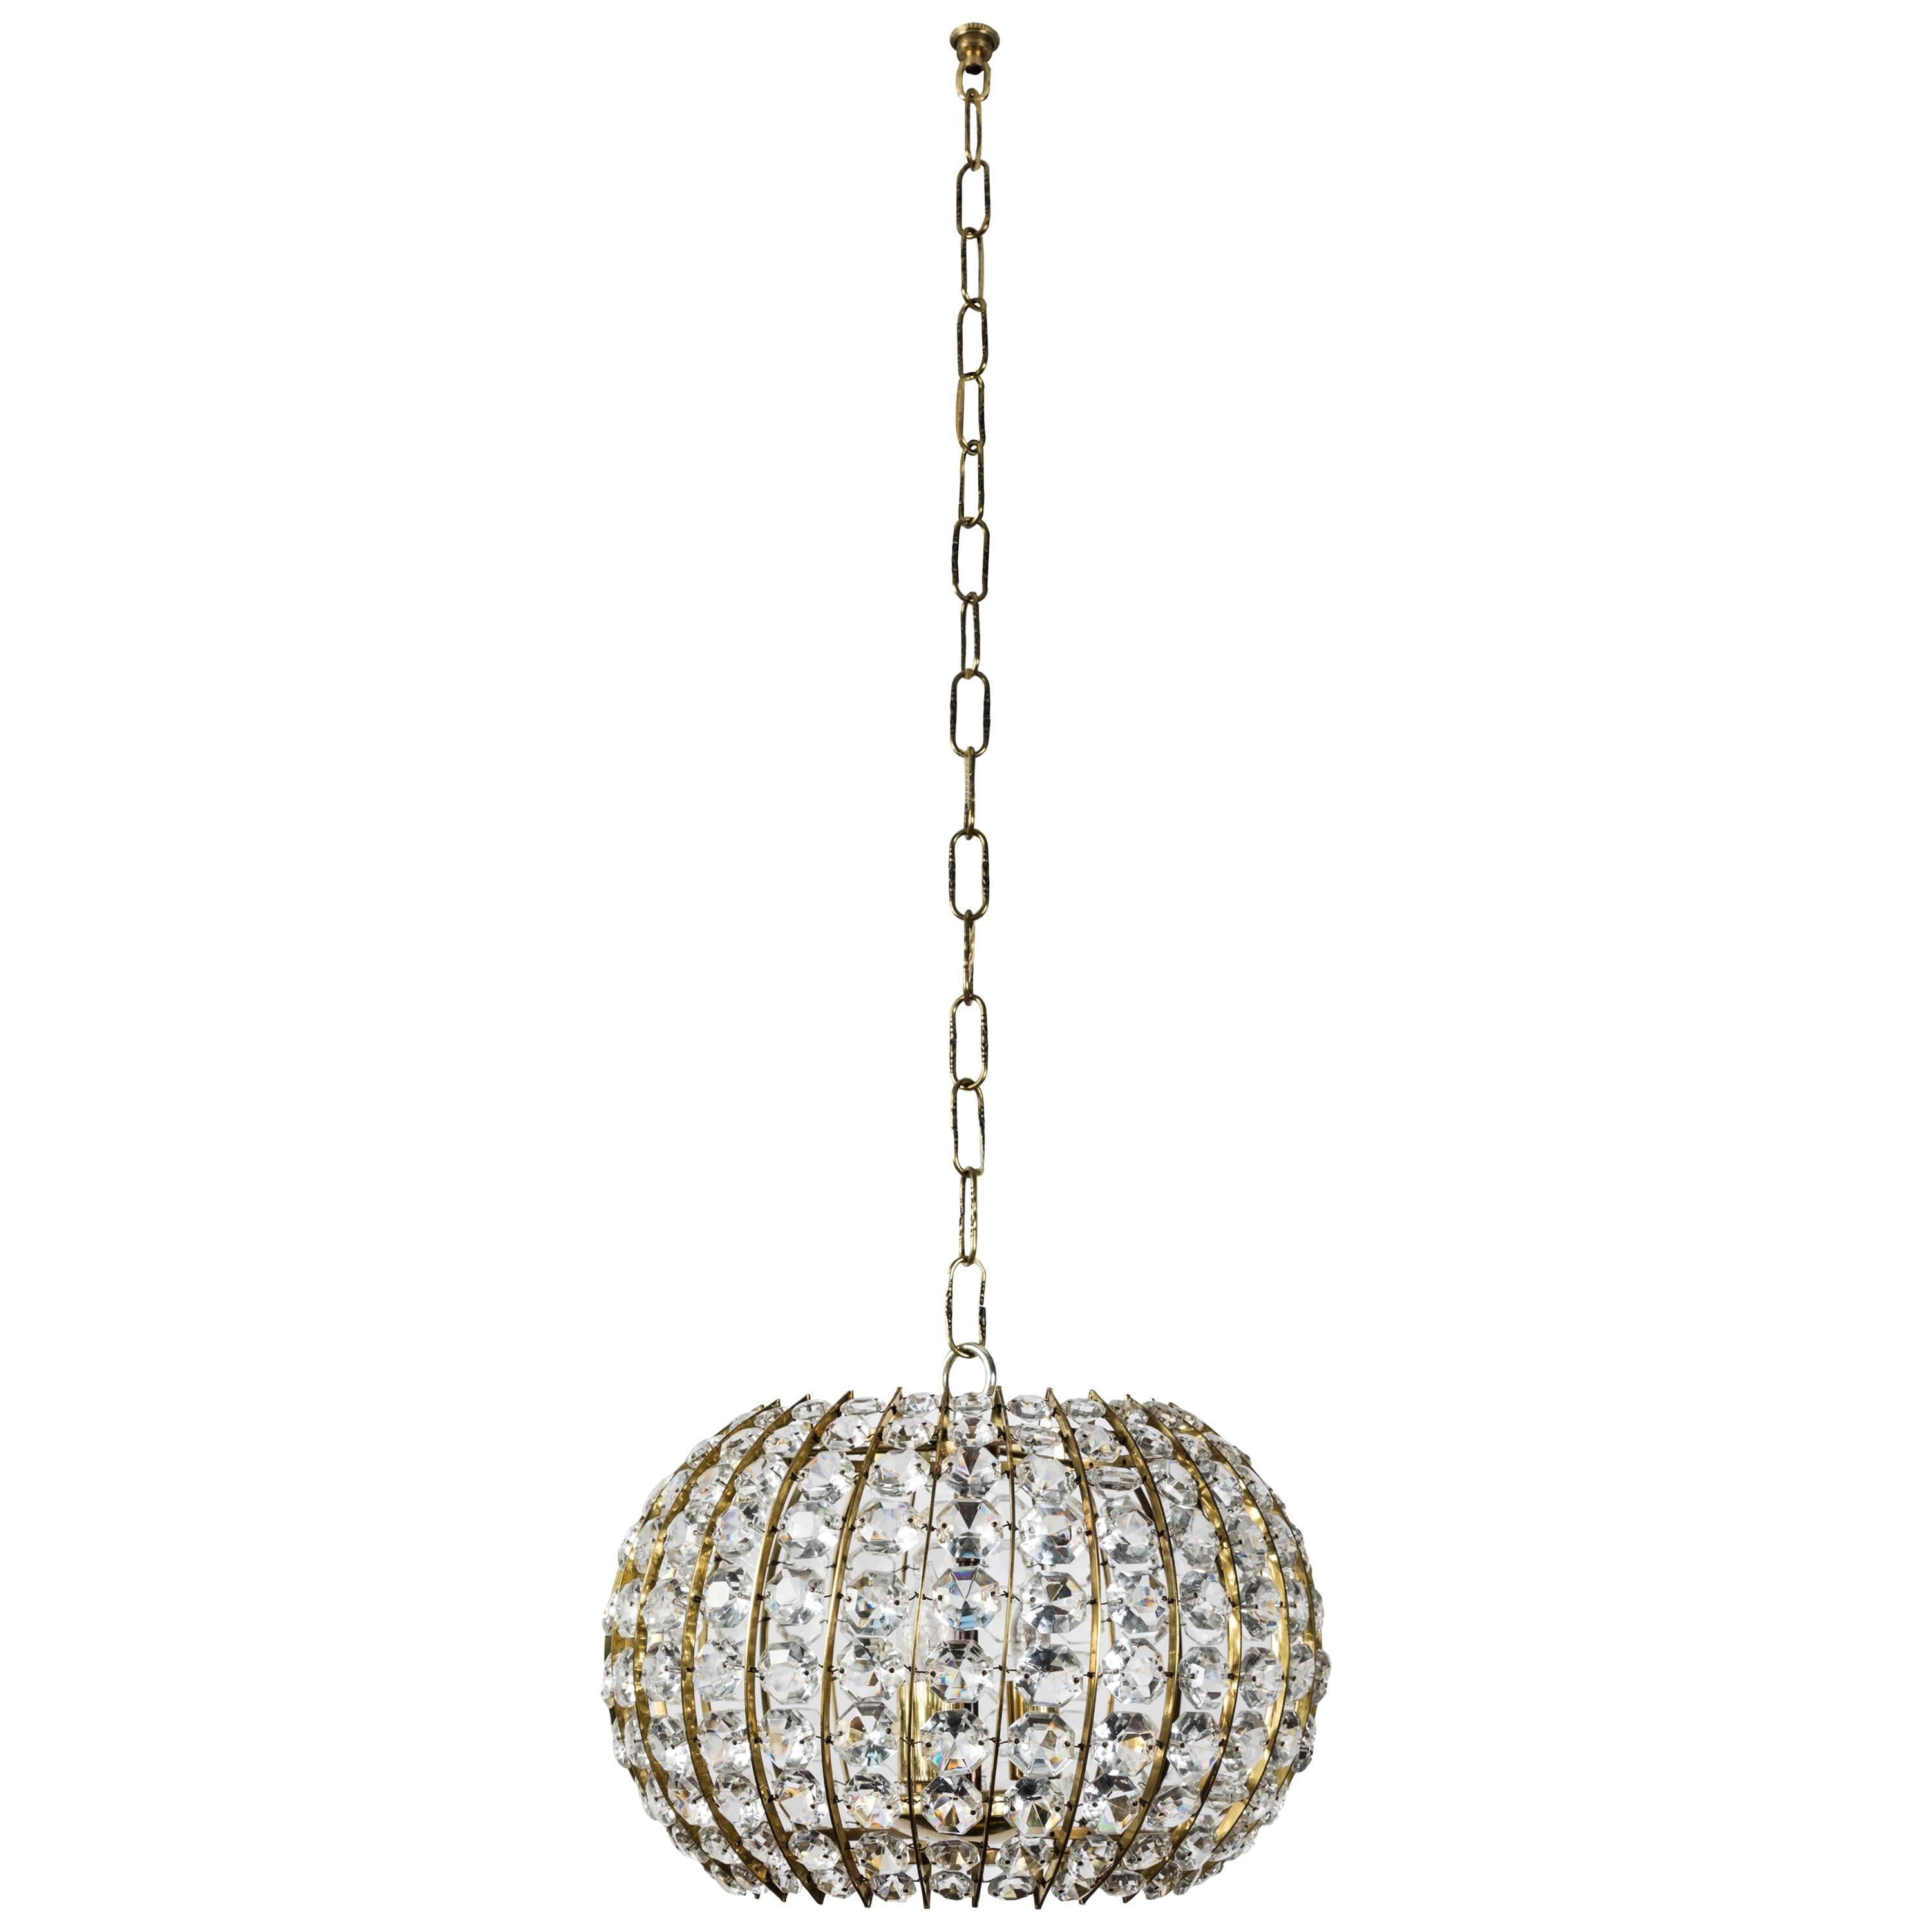 Crystal and Brass Pendant Fixture